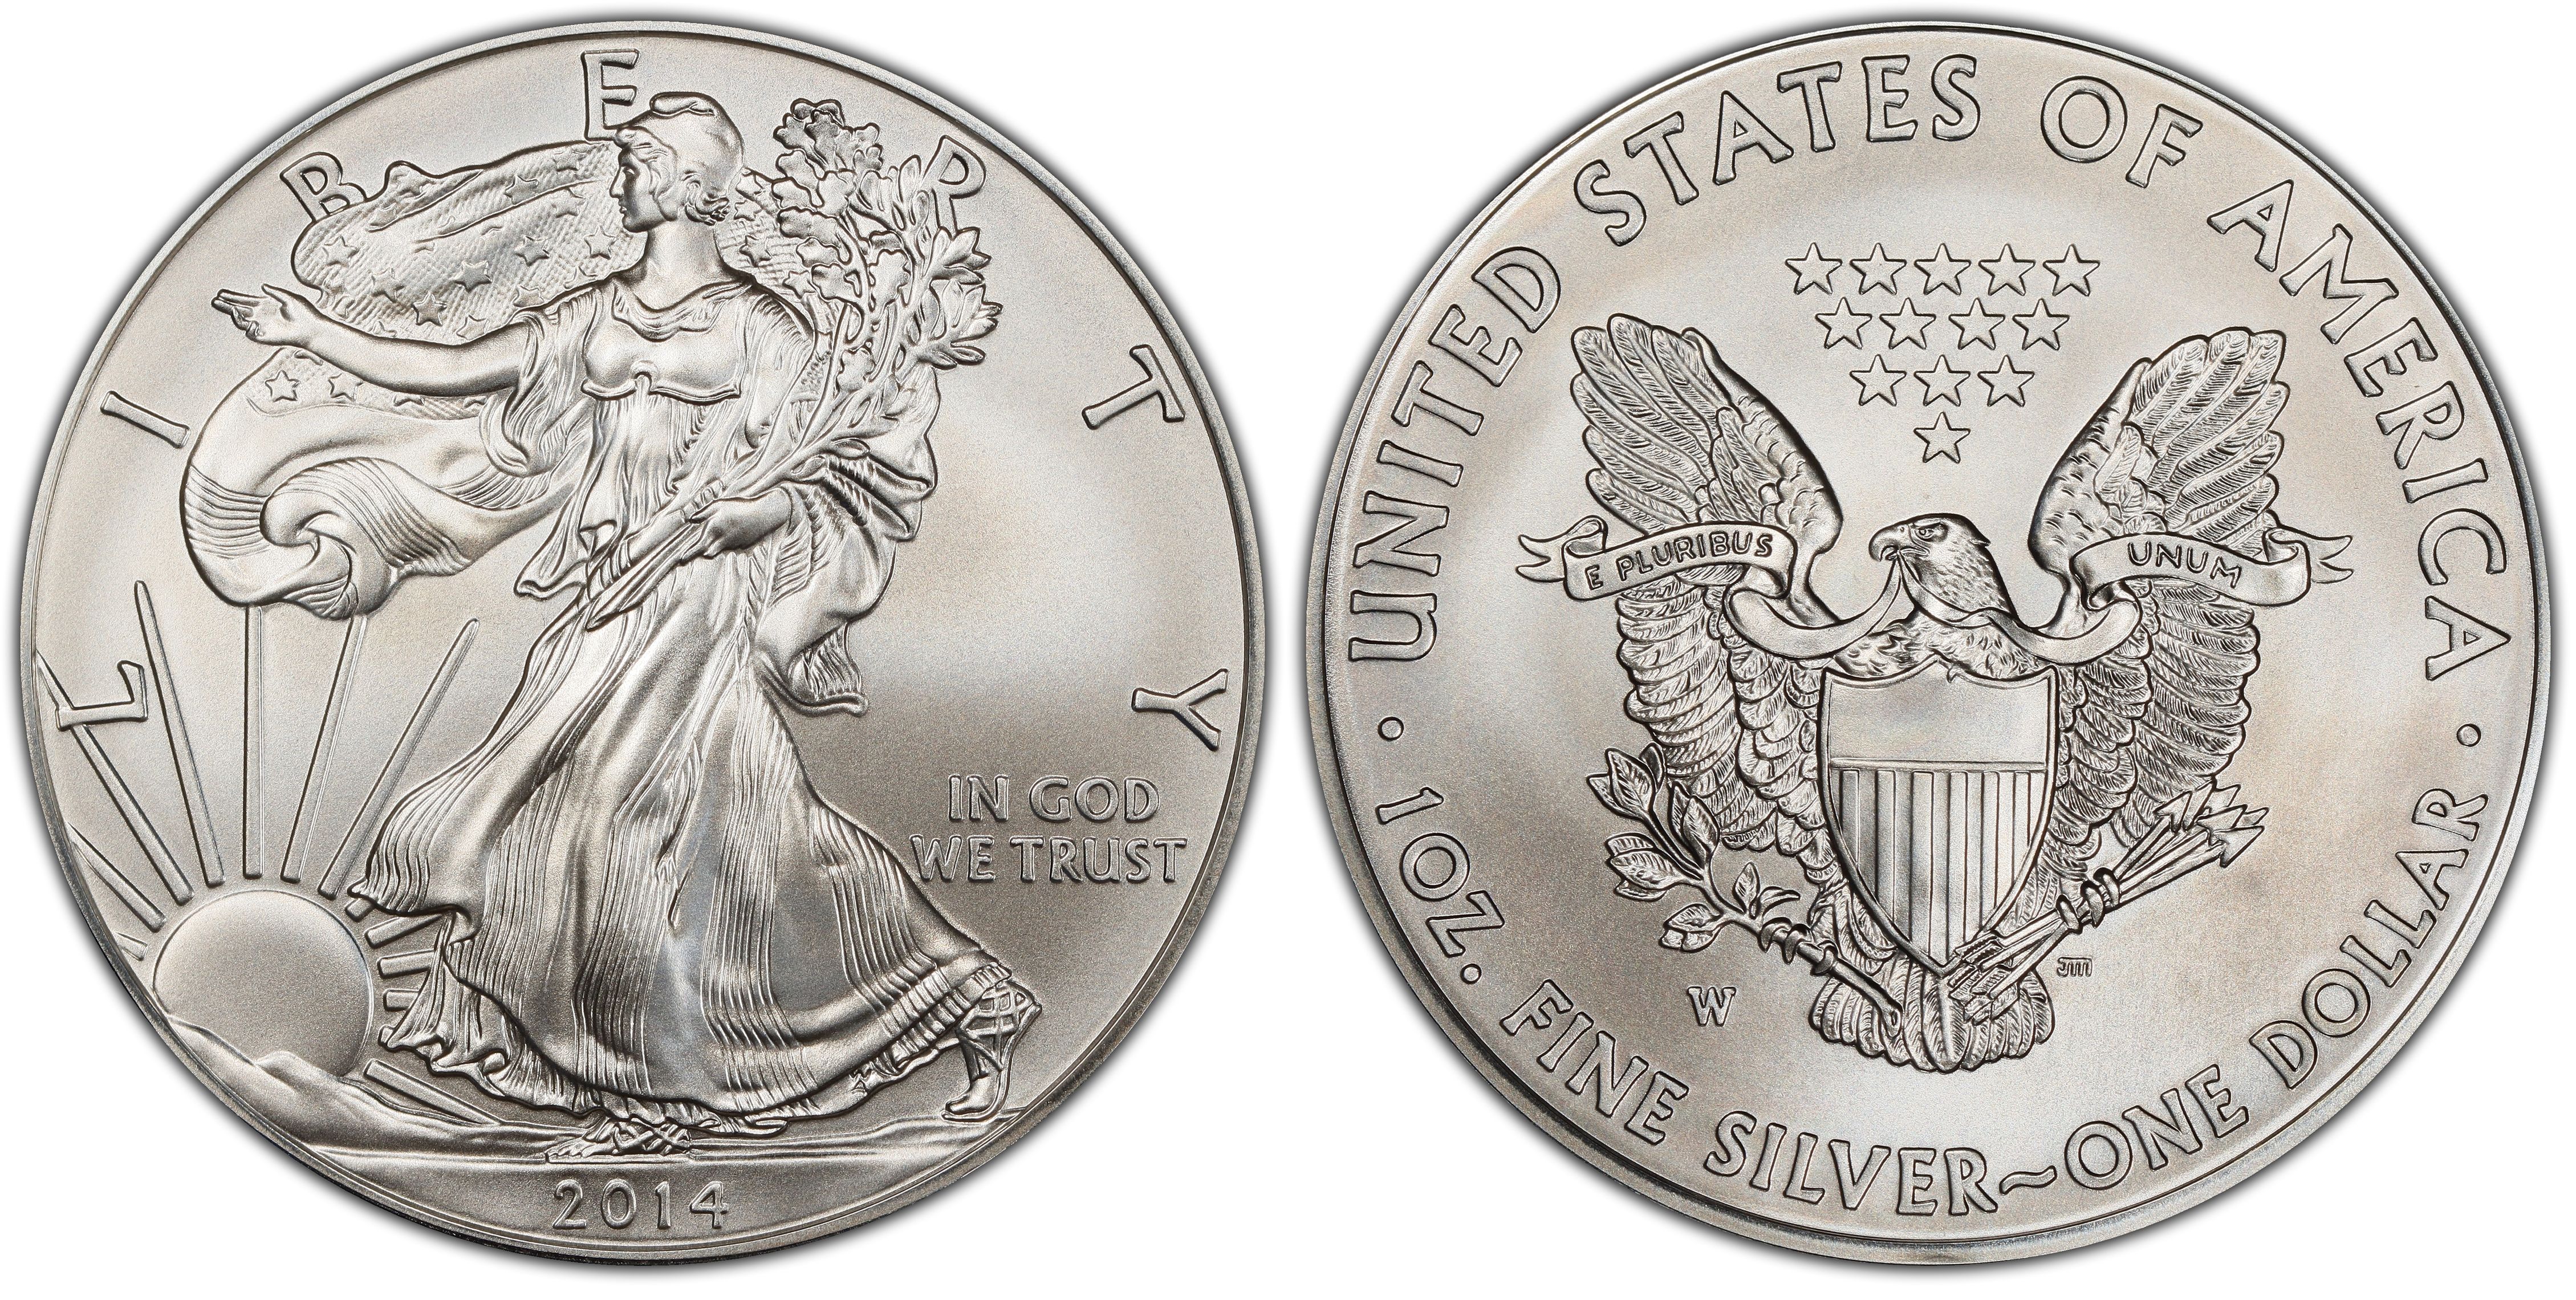 Details about   2014-W BURNISHED SILVER EAGLE Direct from the US Mint With Box & COA's 